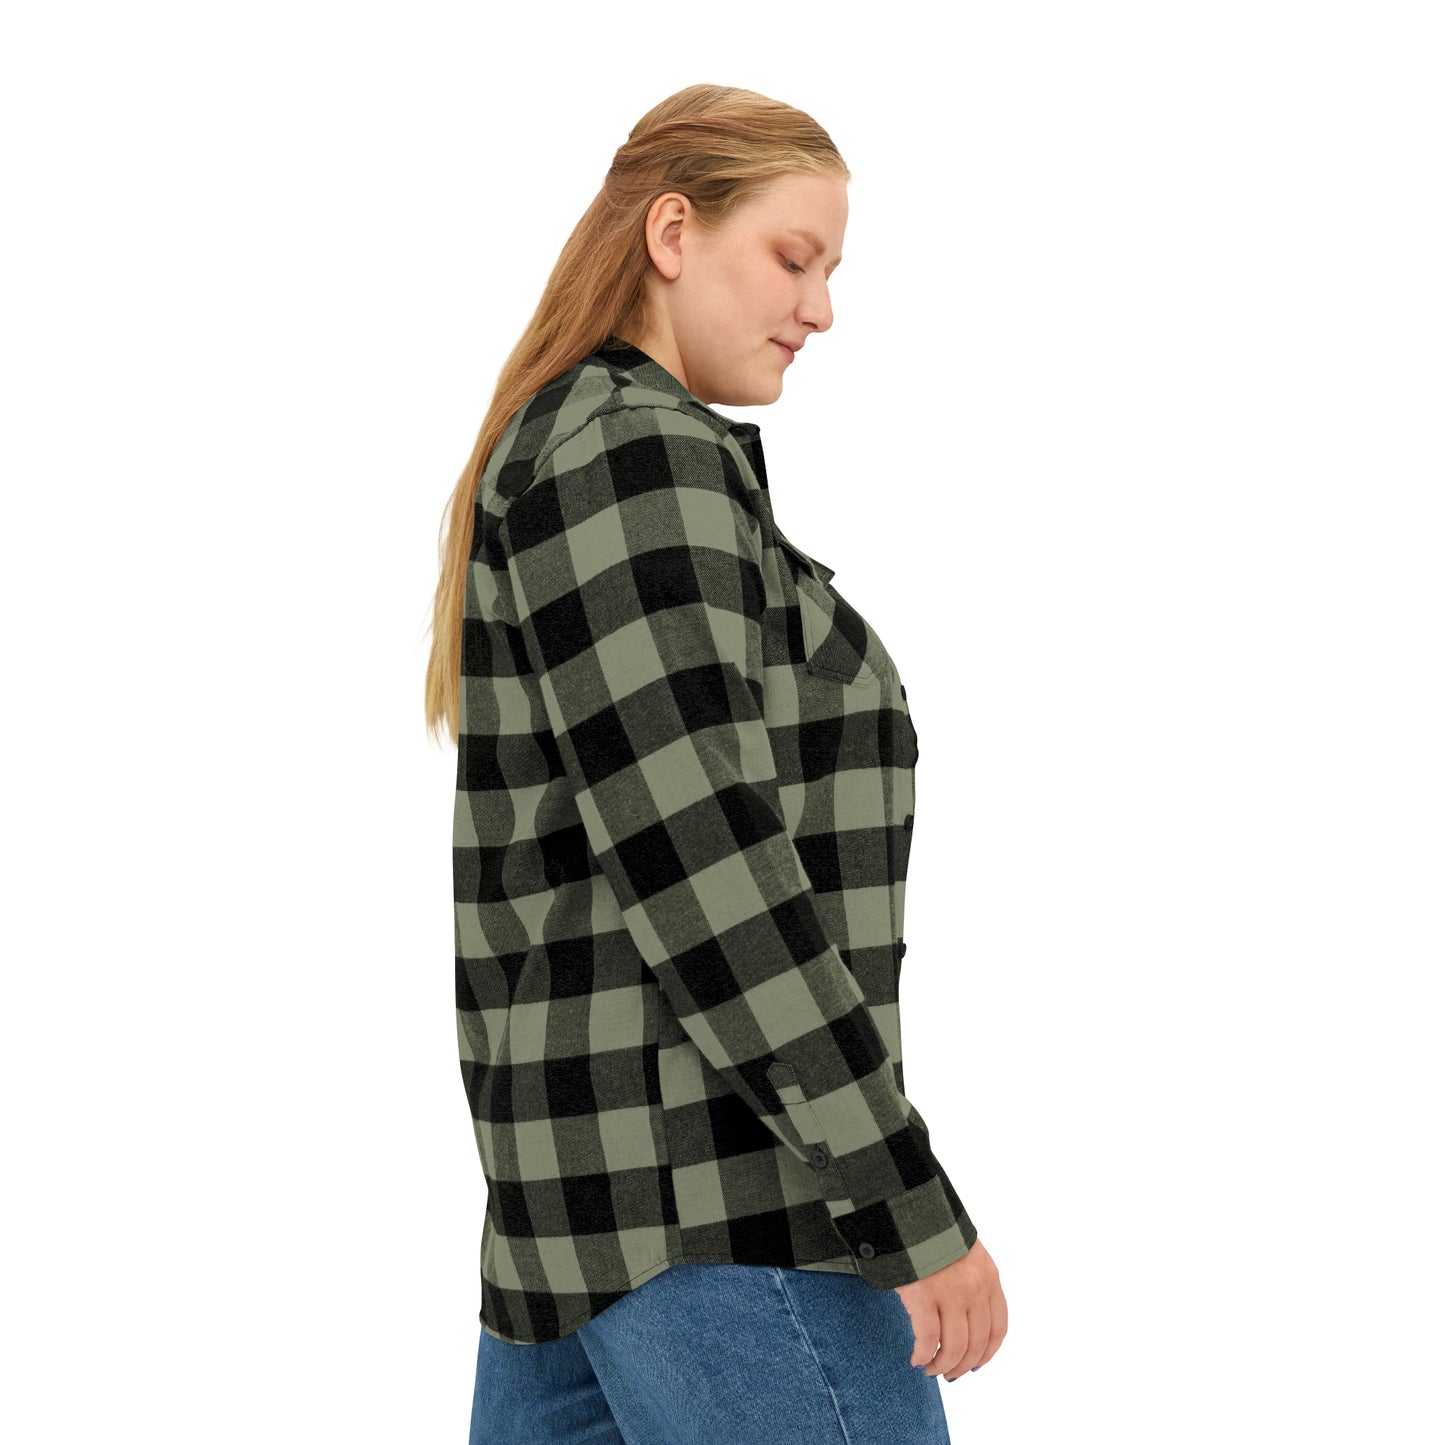 Flannel Shirt with Global University Seal